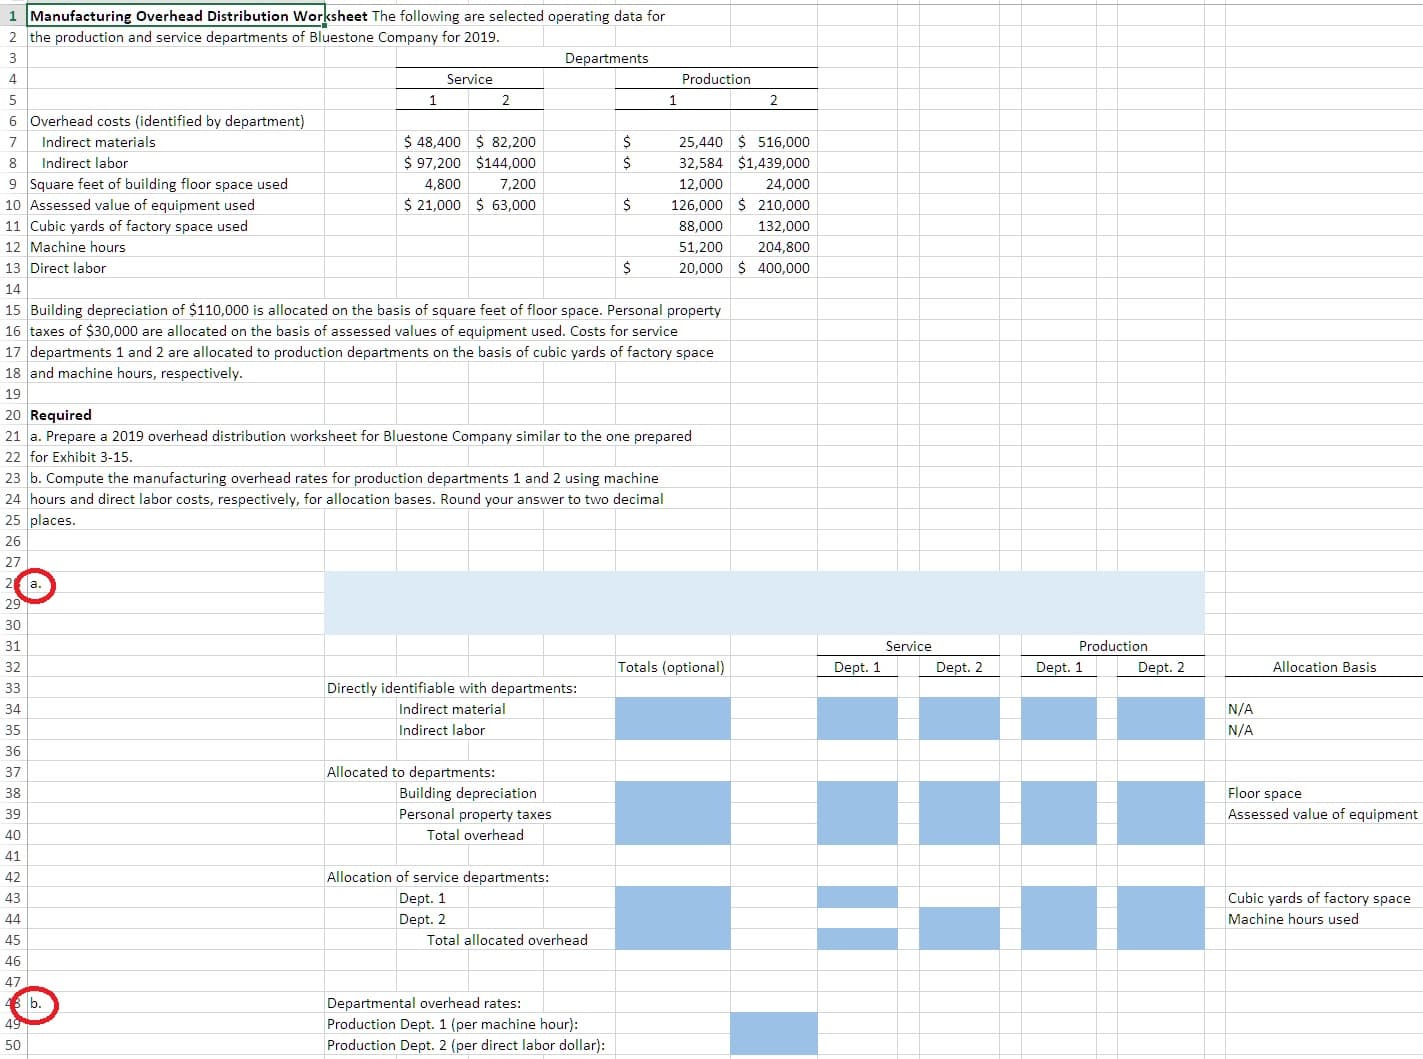 1 Manufacturing Overhead Distribution Worksheet The following are selected operating data for
2 the production and service departments of Bluestone Company for 2019
3
Departments
Service
Production
4
1
2
1
2
6 Overhead costs (identified by department)
$ 48,400 82,200
25,440 516,000
32,584 $1,439,000
Indirect materials
7
$97,200 $144,000
Indirect labor
8
7,200
9 Square feet of building floor space used
10 Assessed value of equipment used
11 Cubic yards of factory space used
4,800
24,000
12,000
$ 21,000 63,000
126,000 210,000
88,000
132,000
12 Machine hours
51,200
204,800
20,000 400,000
13 Direct labor
14
15 Building depreciation of $110,000 is allocated on the basis of square feet of floor space. Personal property
16 taxes of $30,000 are allocated on the basis of assessed values of equipment used. Costs for service
17 departments 1 and 2 are allocated to production departments on the basis of cubic yards of factory space
18 and machine hours, respectively.
19
20 Required
21 a. Prepare a 2019 overhead distribution worksheet for Bluestone Company similar to the one prepared
22 for Exhibit 3-15
23 b. Compute the manufacturing overhead rates for production departments 1 and 2 using machine
24 hours and direct labor costs, respectively, for allocation bases. Round your answer to two decimal
25 places.
26
27
2 a.
29
30
Service
Production
31
Totals (optional)
Dept. 1
Dept. 2
Allocation Basis
32
Dept. 1
Dept. 2
Directly identifiable with departments:
33
Indirect material
N/A
34
Indirect labor
N/A
35
36
Allocated to departments:
37
Building depreciation
Personal property taxes
Floor space
38
Assessed value of equipment
39
Total overhead
40
41
Allocation of service departments:
42
Cubic yards of factory space
43
Dept. 1
Machine hours used
44
Dept. 2
Total allocated overhead
45
46
Departmental overhead rates:
b.
49
Production Dept. 1 (per machine hour):
Production Dept. 2 (per direct labor dollar):
50
